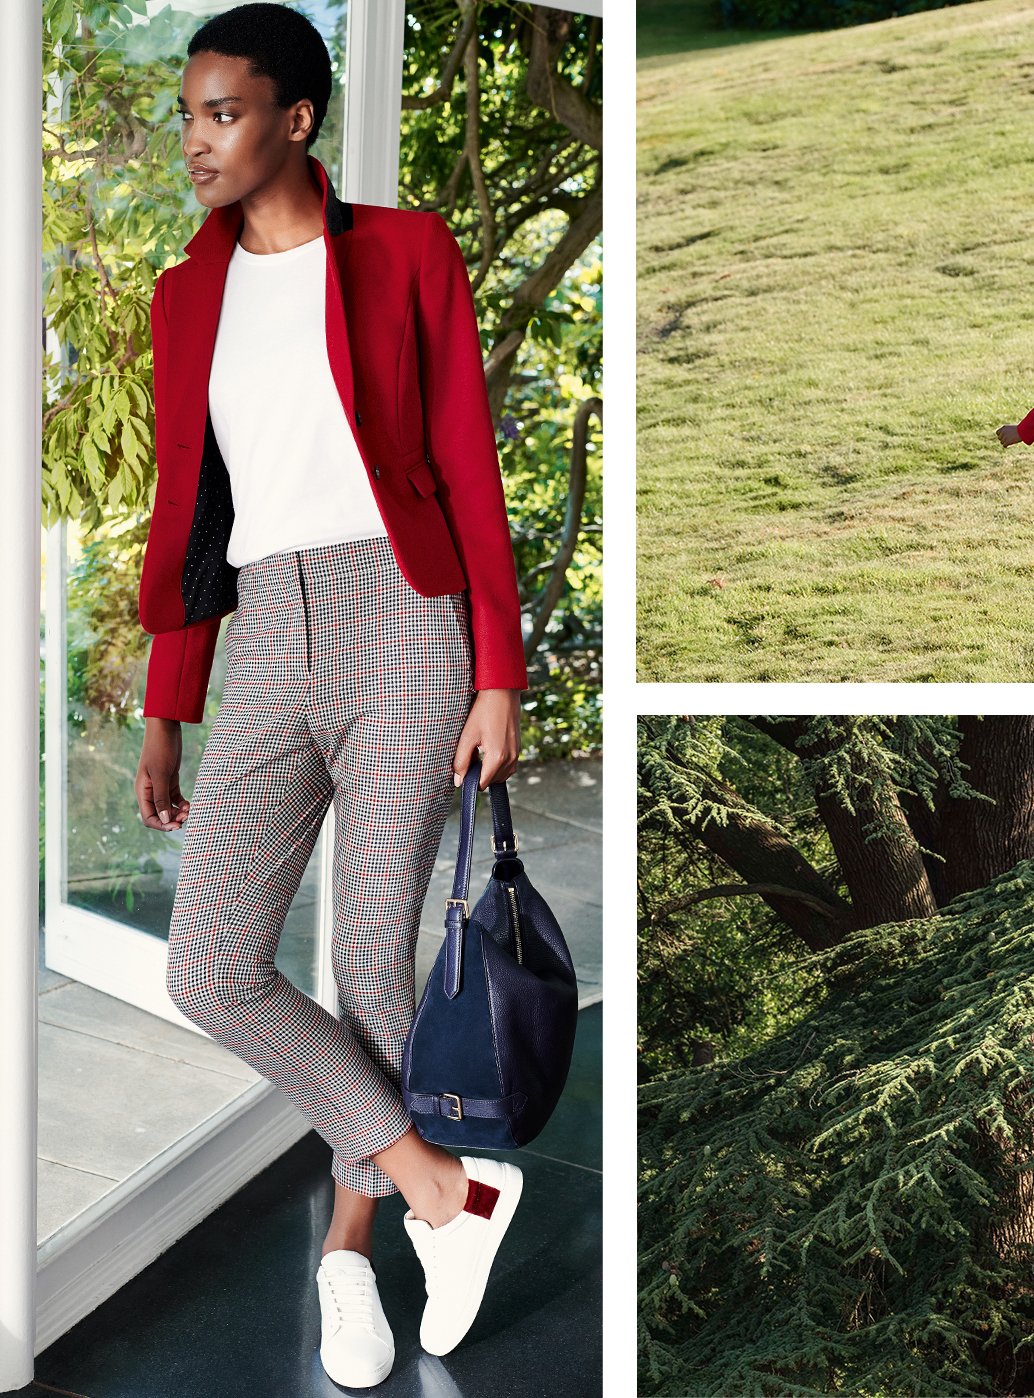 Model wears a bright red wool jacket, tailored trousers, white leather trainers with a blue leather bag